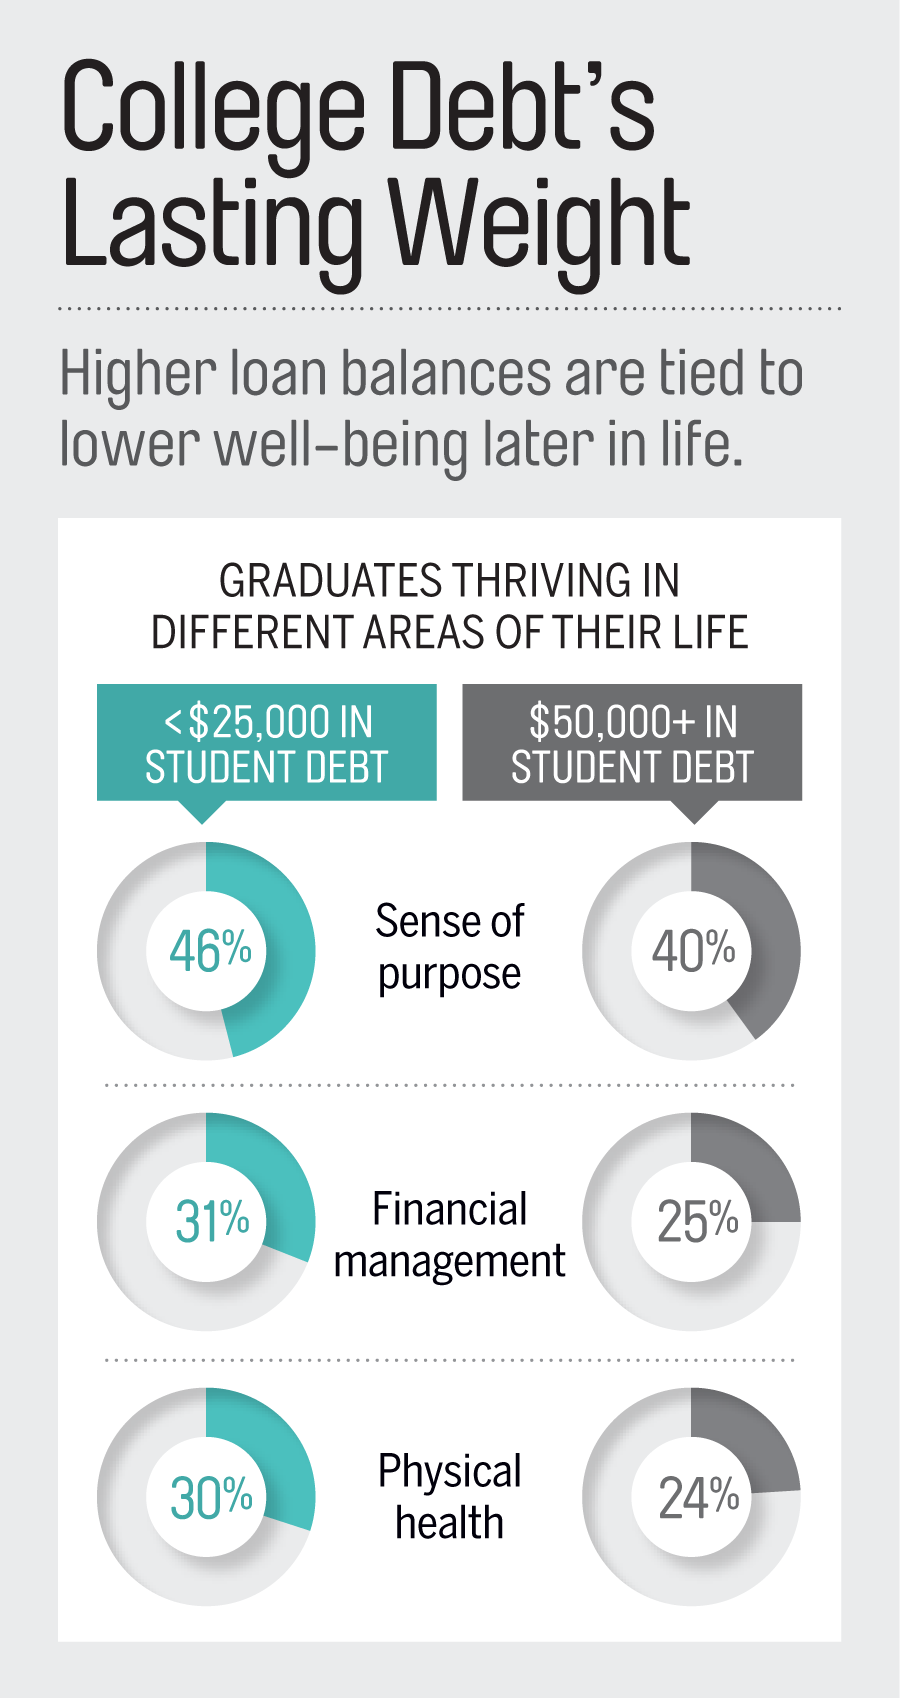 Notes: Based on self-reports of âthrivingâ in a particular area, vs. âstrugglingâ or âsuffering.â Amounts are for undergraduate debt only. Source: Gallup, 2014